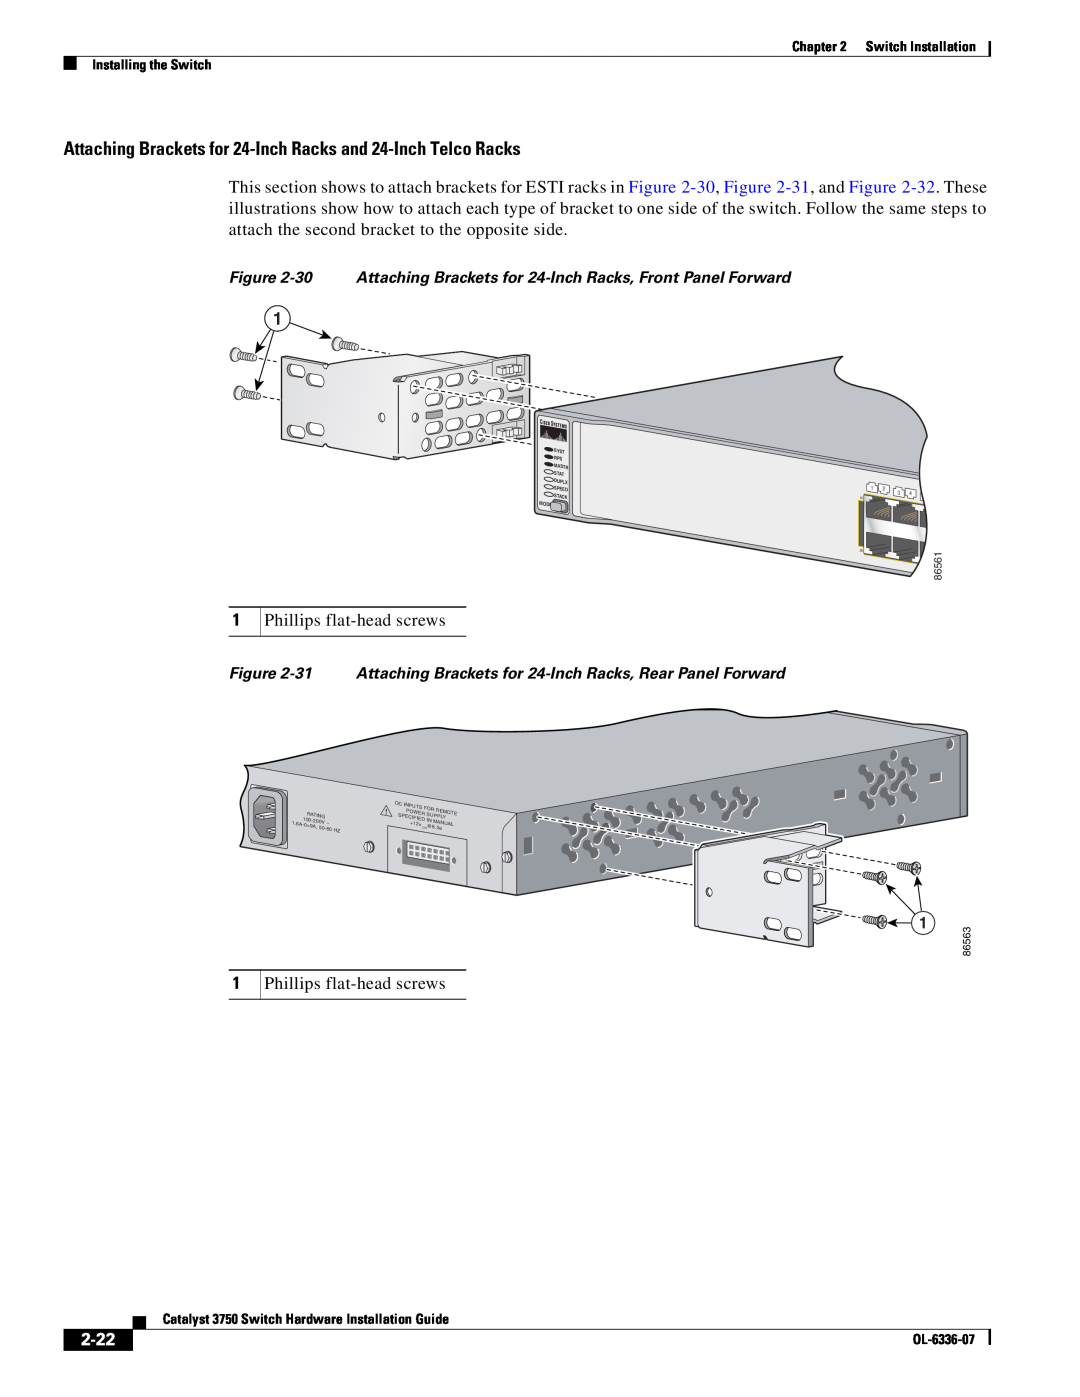 Cisco Systems WSC3750X24TS specifications Attaching Brackets for 24-Inch Racks and 24-Inch Telco Racks, 2-22 